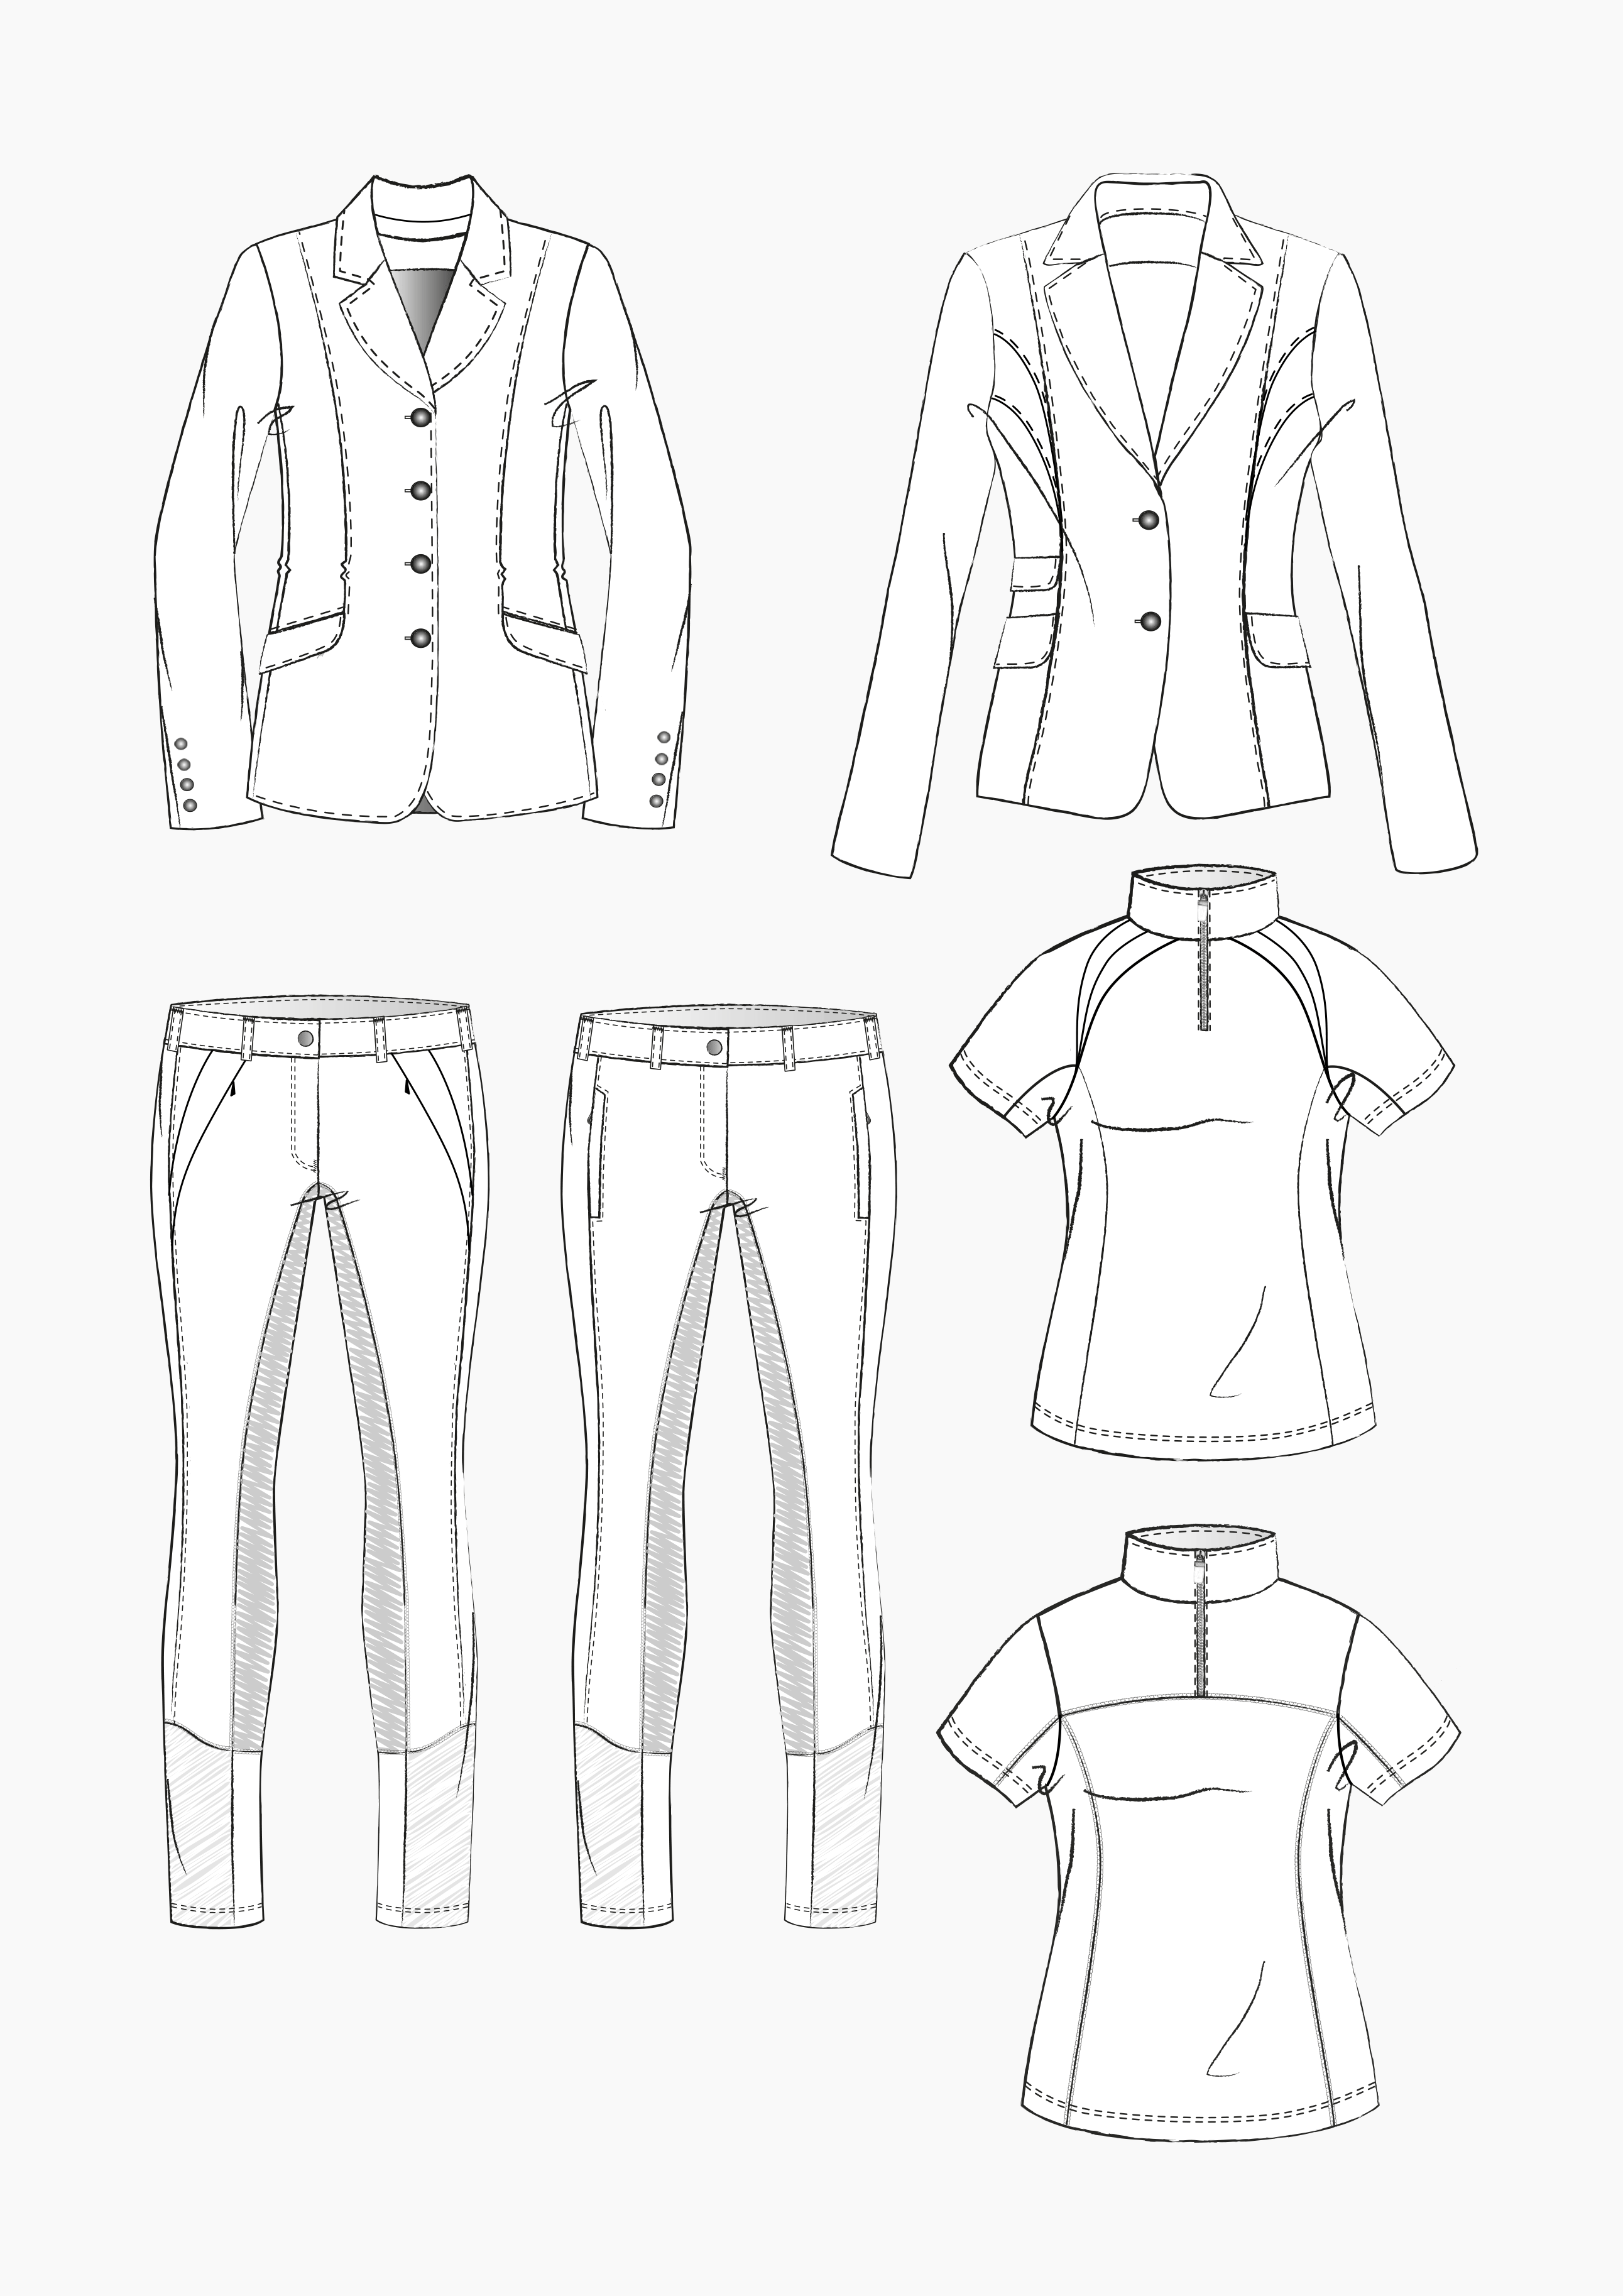 Product: Pattern Making Equestrian Apparel – Part 1